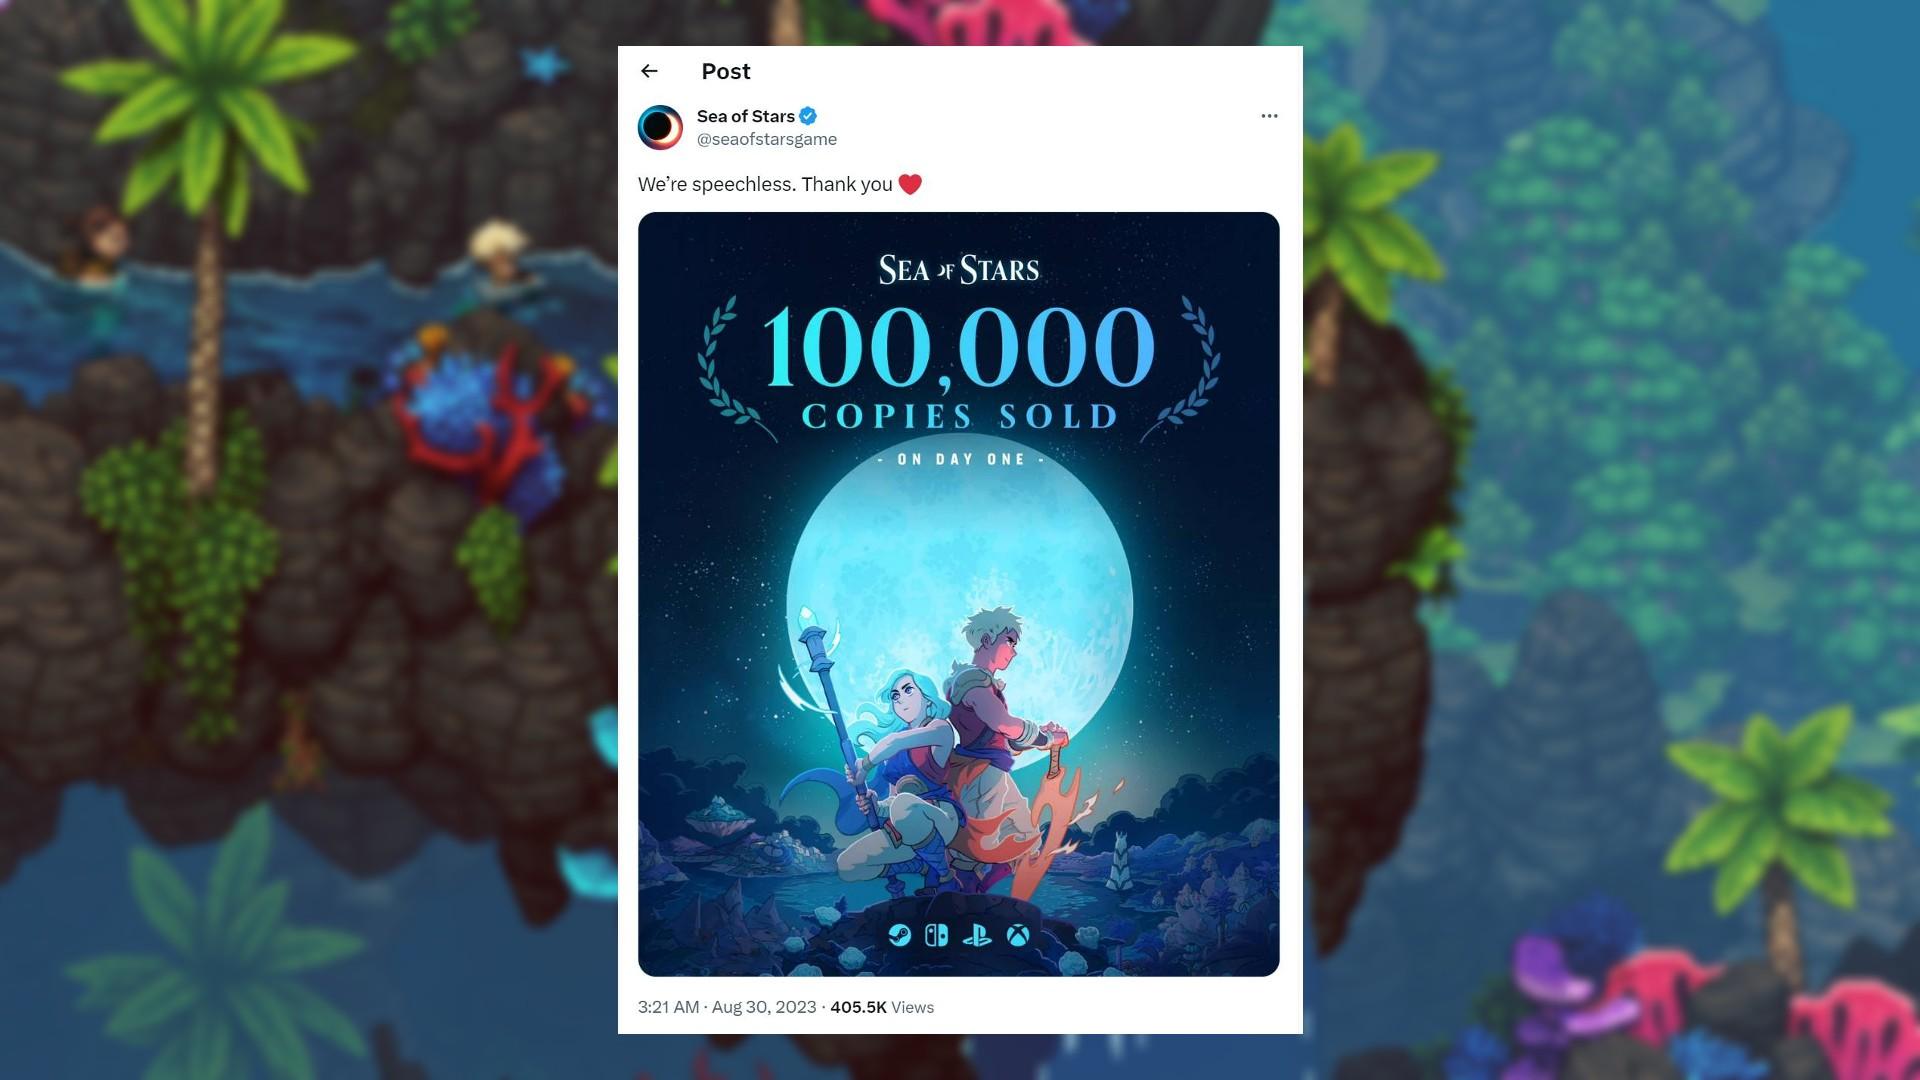 Sea of Stars Release Date Delayed to 2023, Demo Planned for 2022